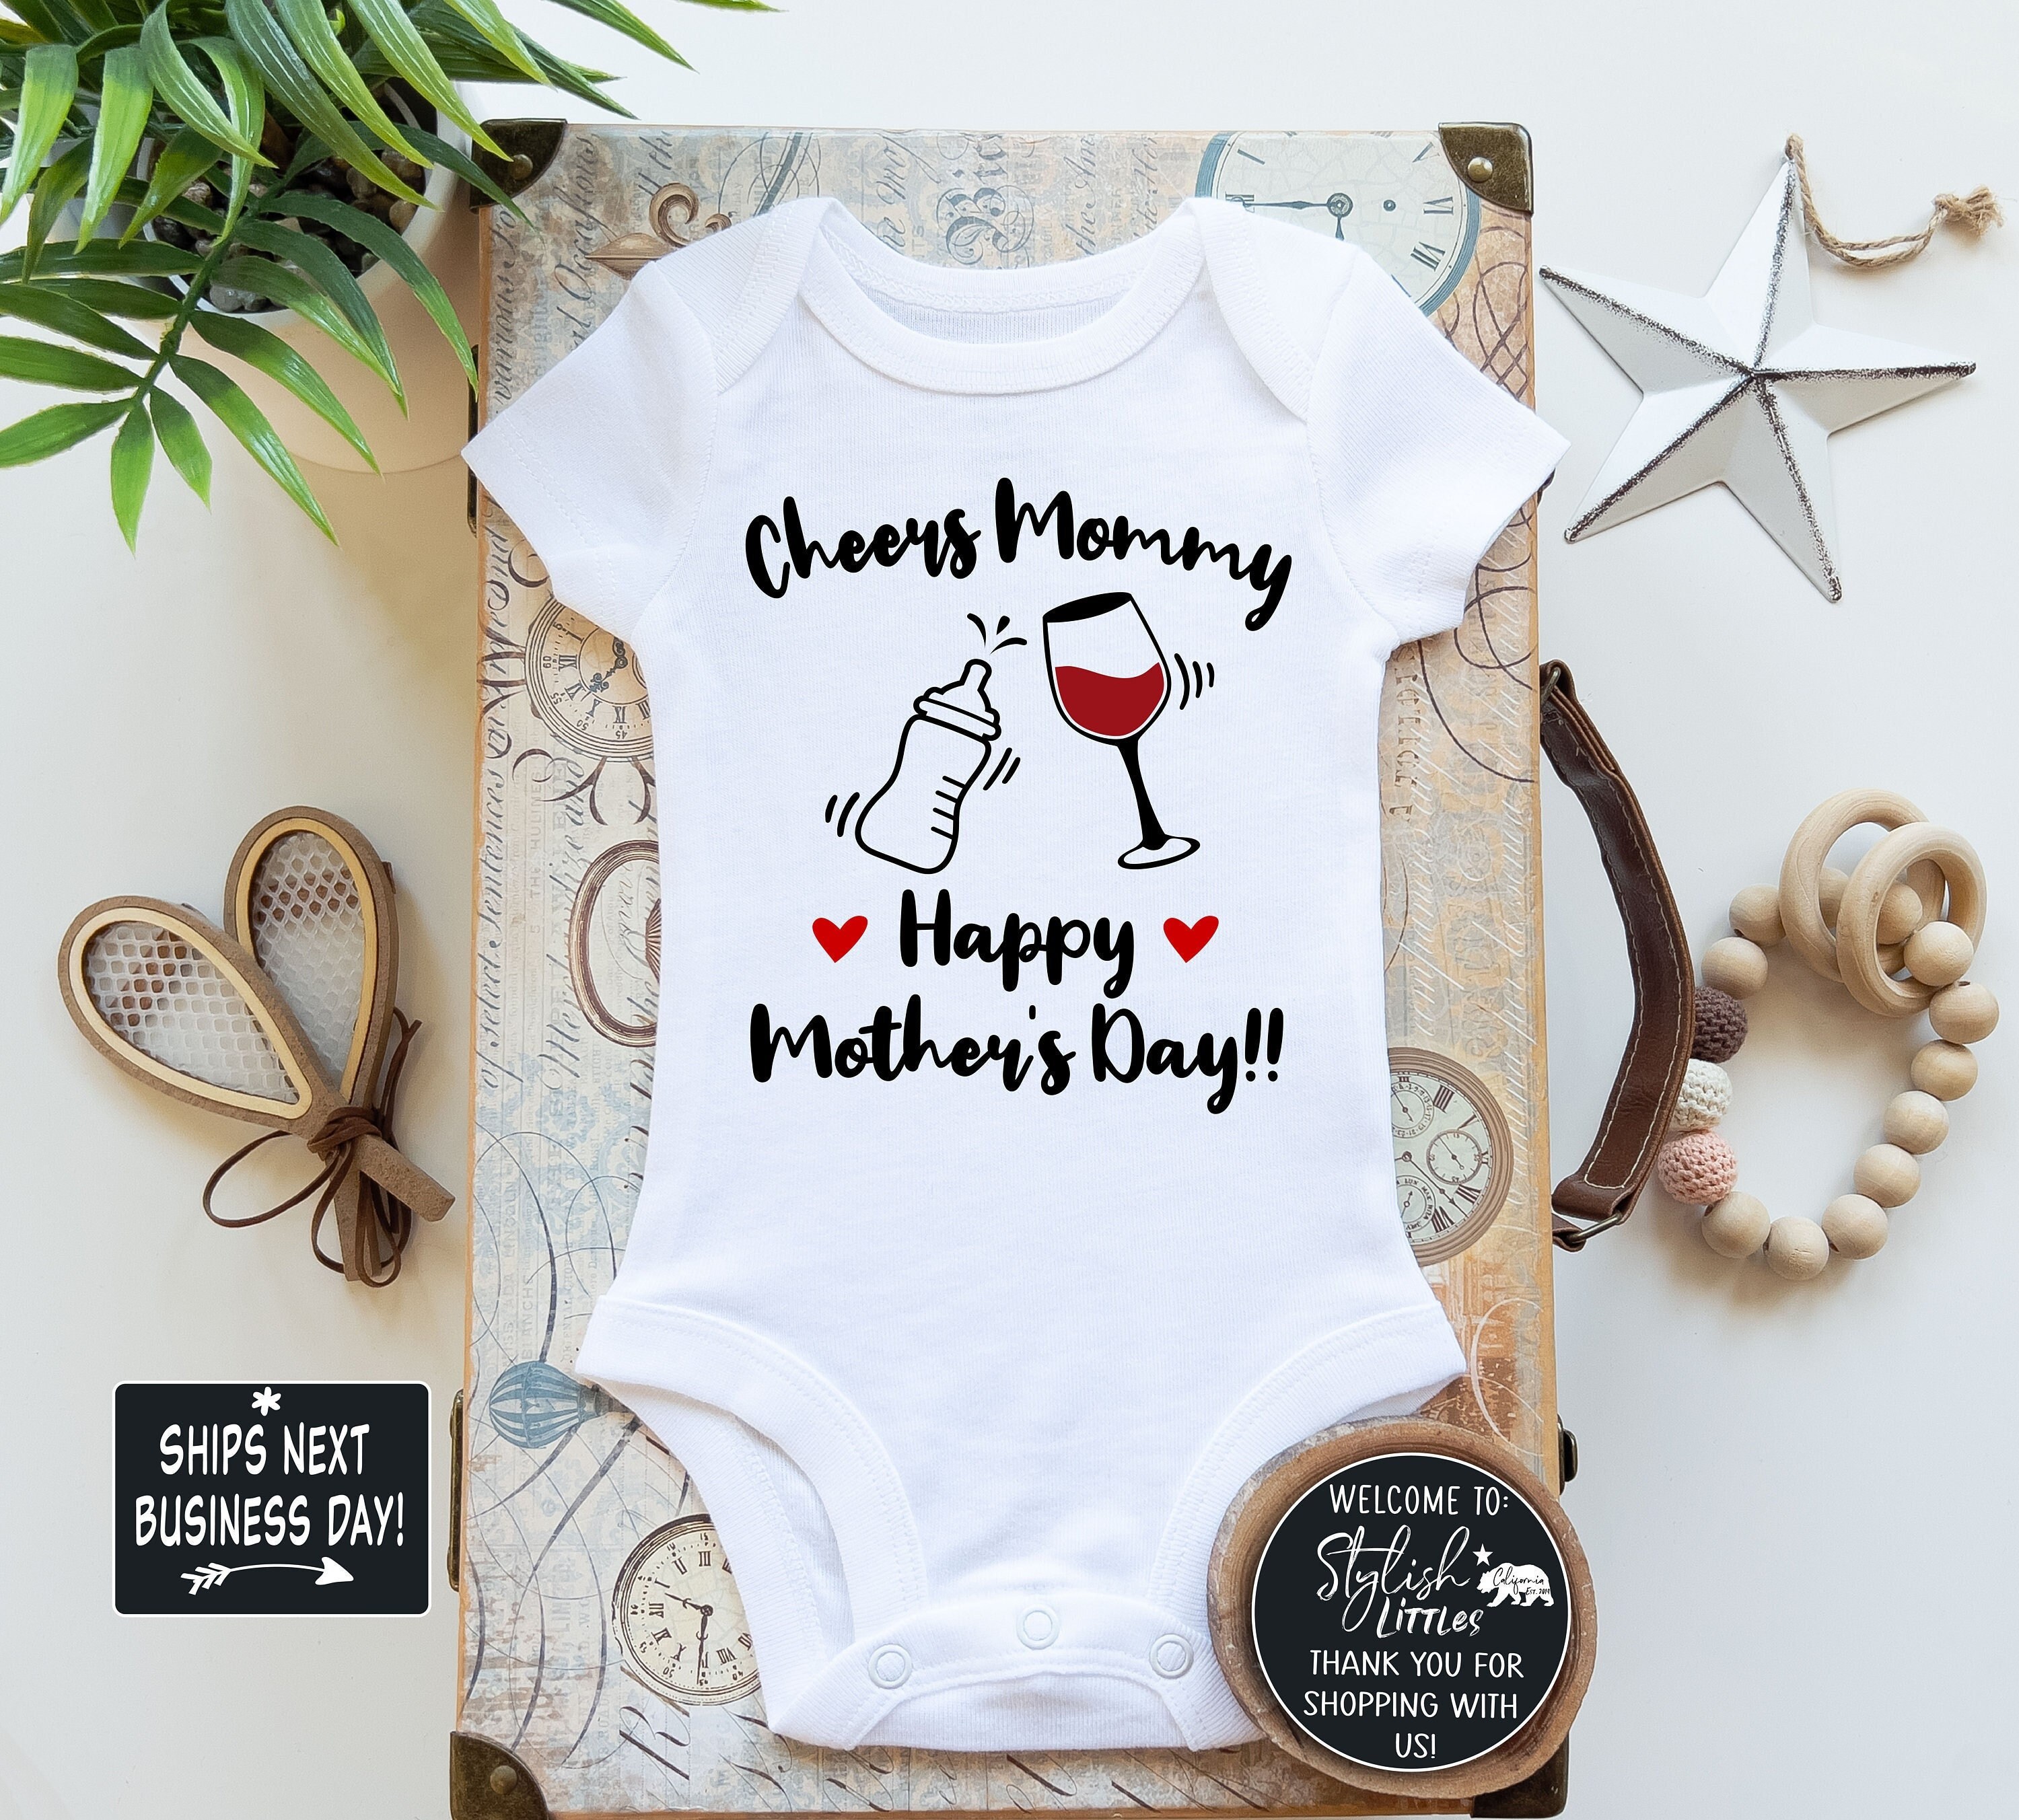 Cheers Mommy Happy Mother’s Day Baby Onesies®, Personalized Gift for New Mom, First 1st Mother’s Day Kid Shirt, BOHO Hipster Baby Kids Shirt